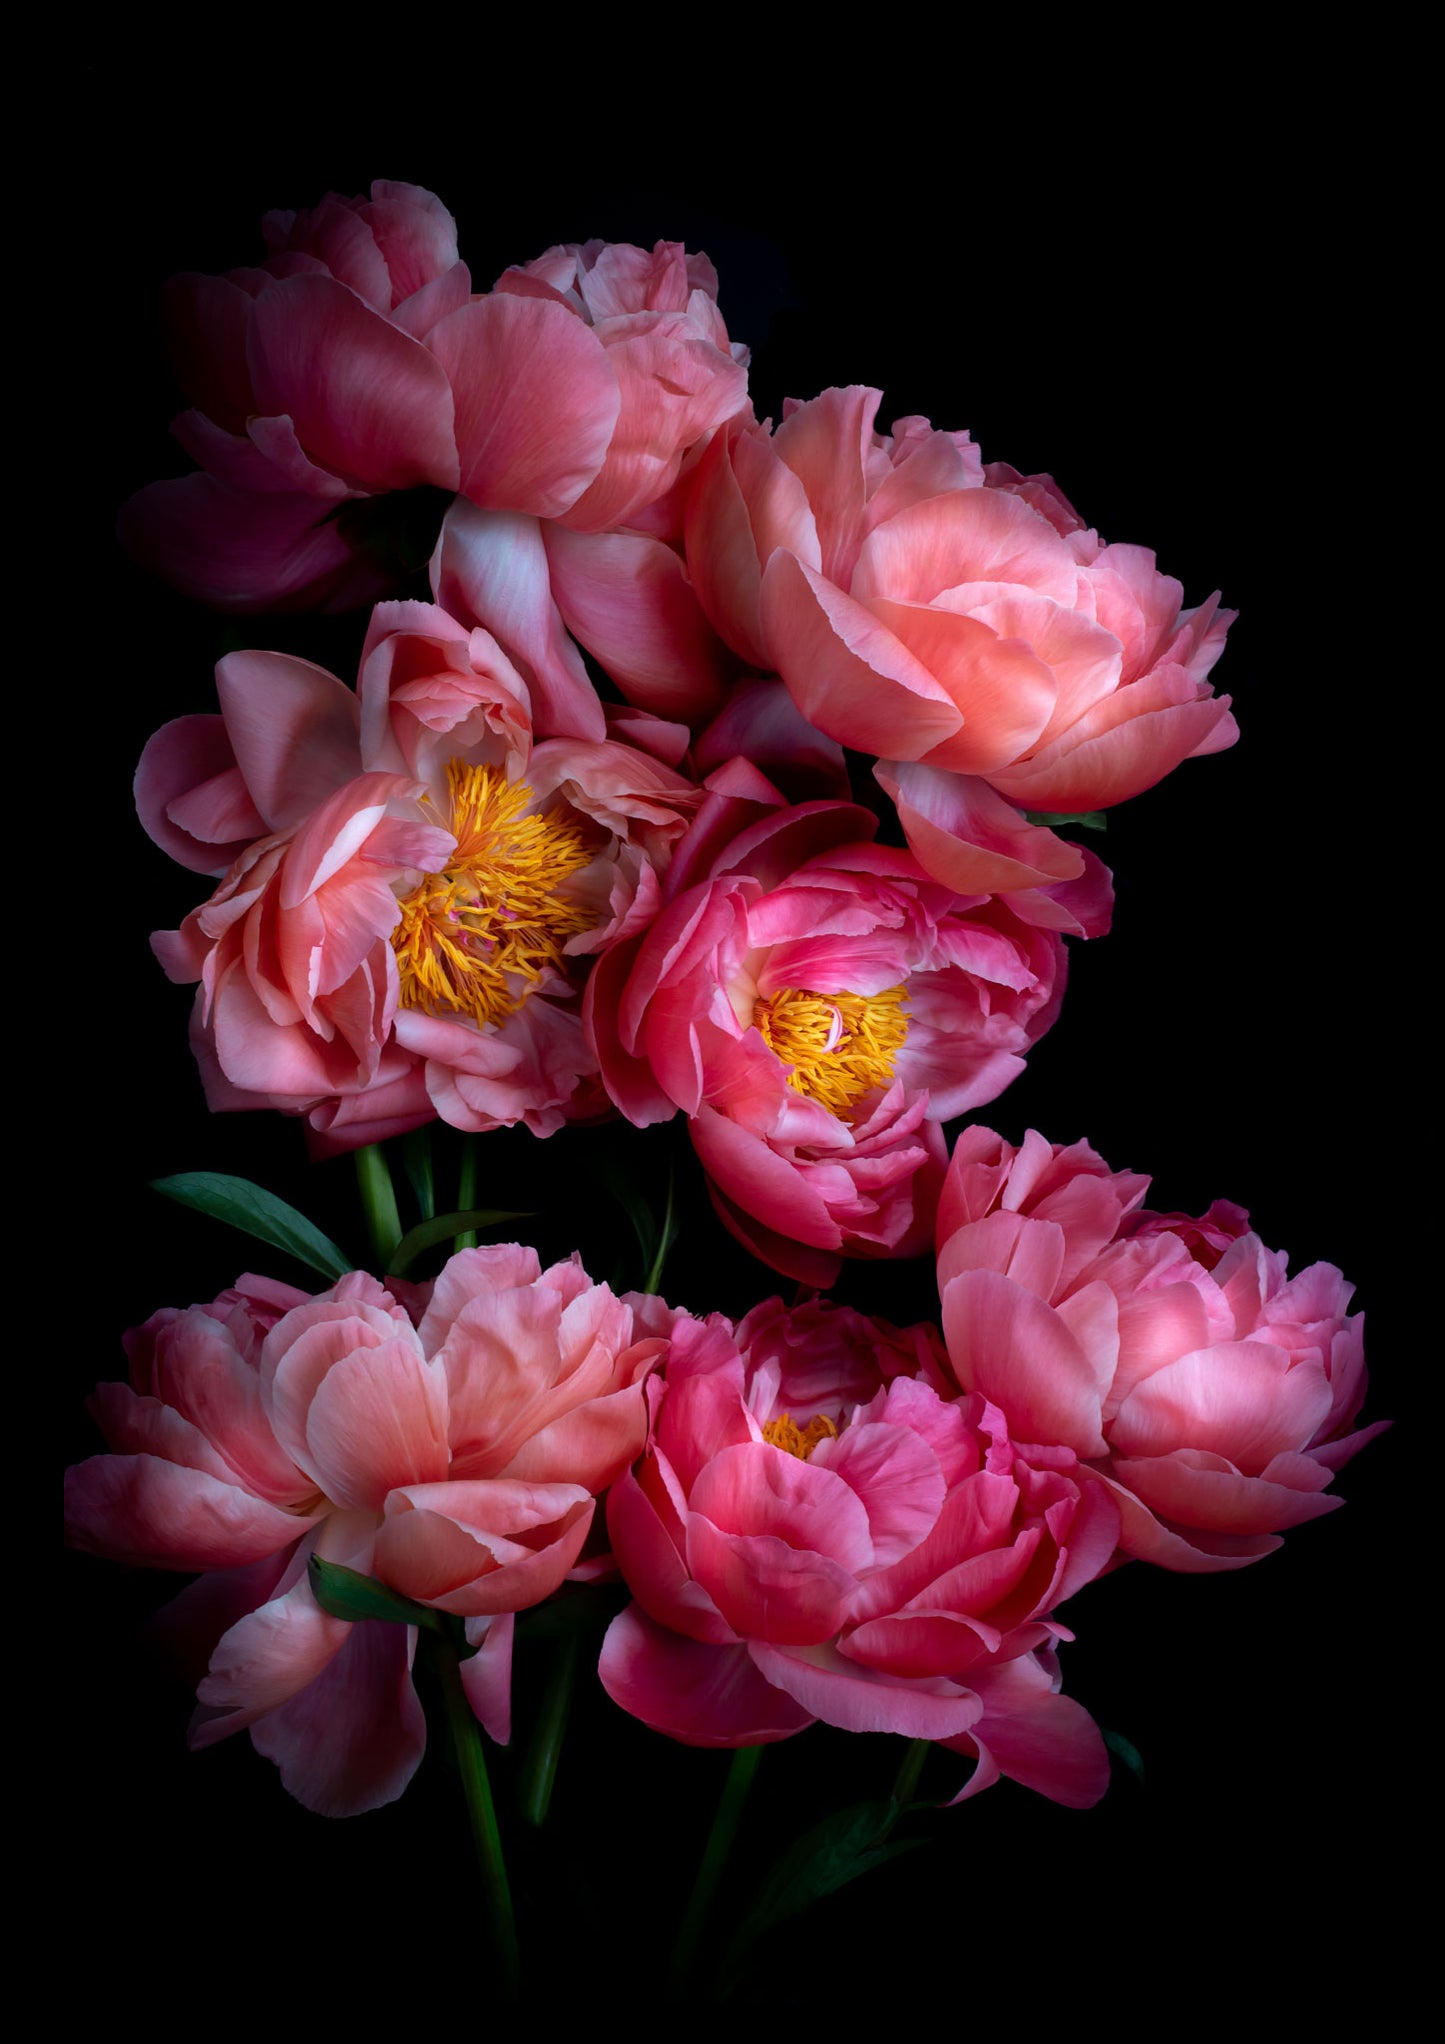 Dark botanical photographic print, featuring Paeonia 'Coral Sunset' on a black background.